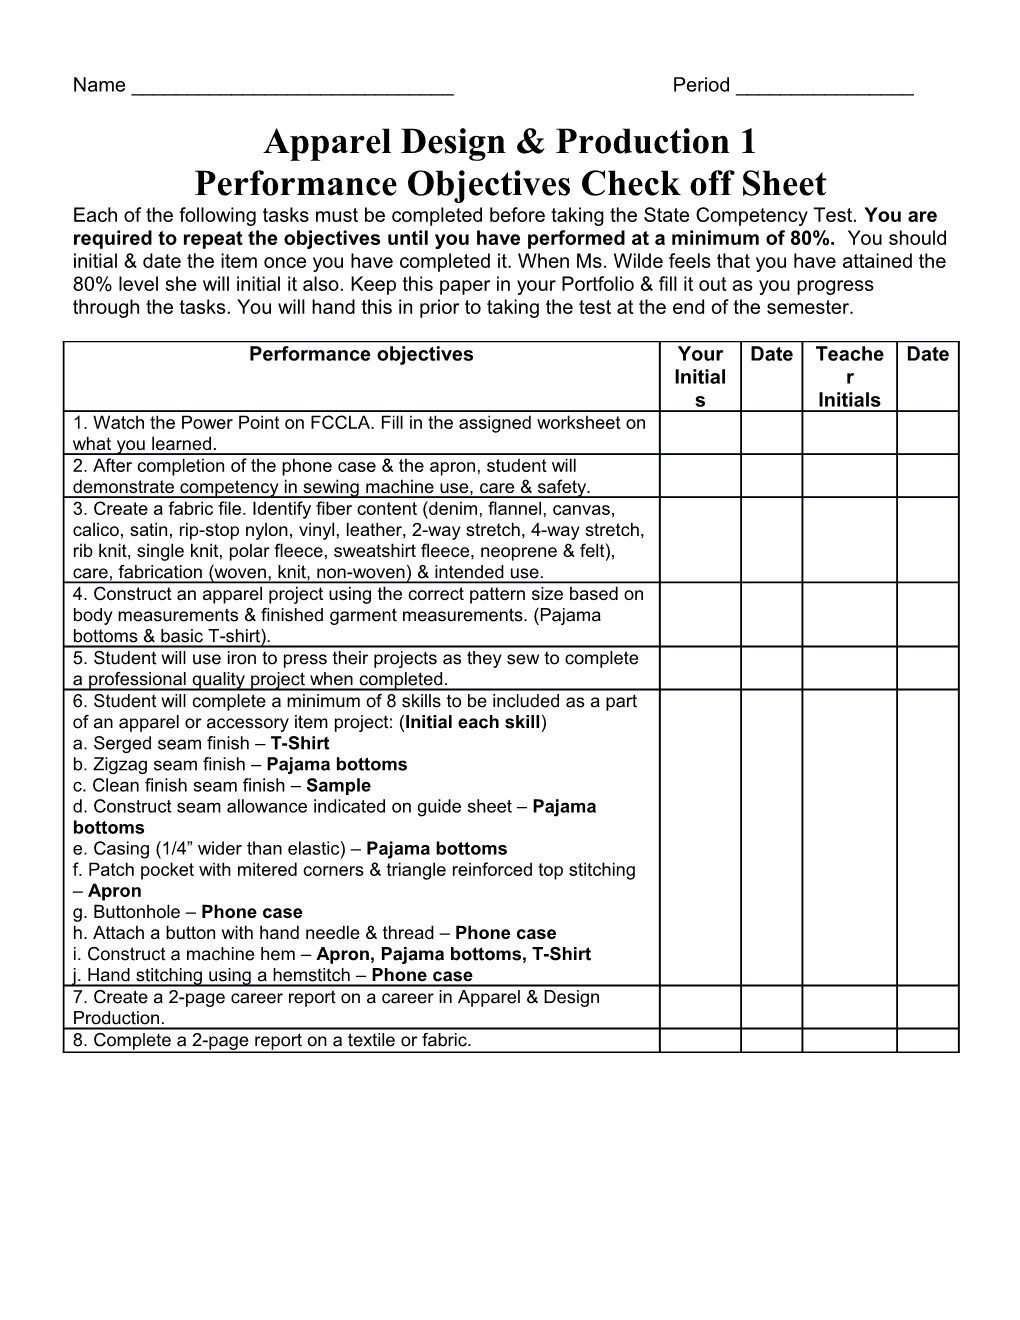 Performance Objectives Check Off Sheet